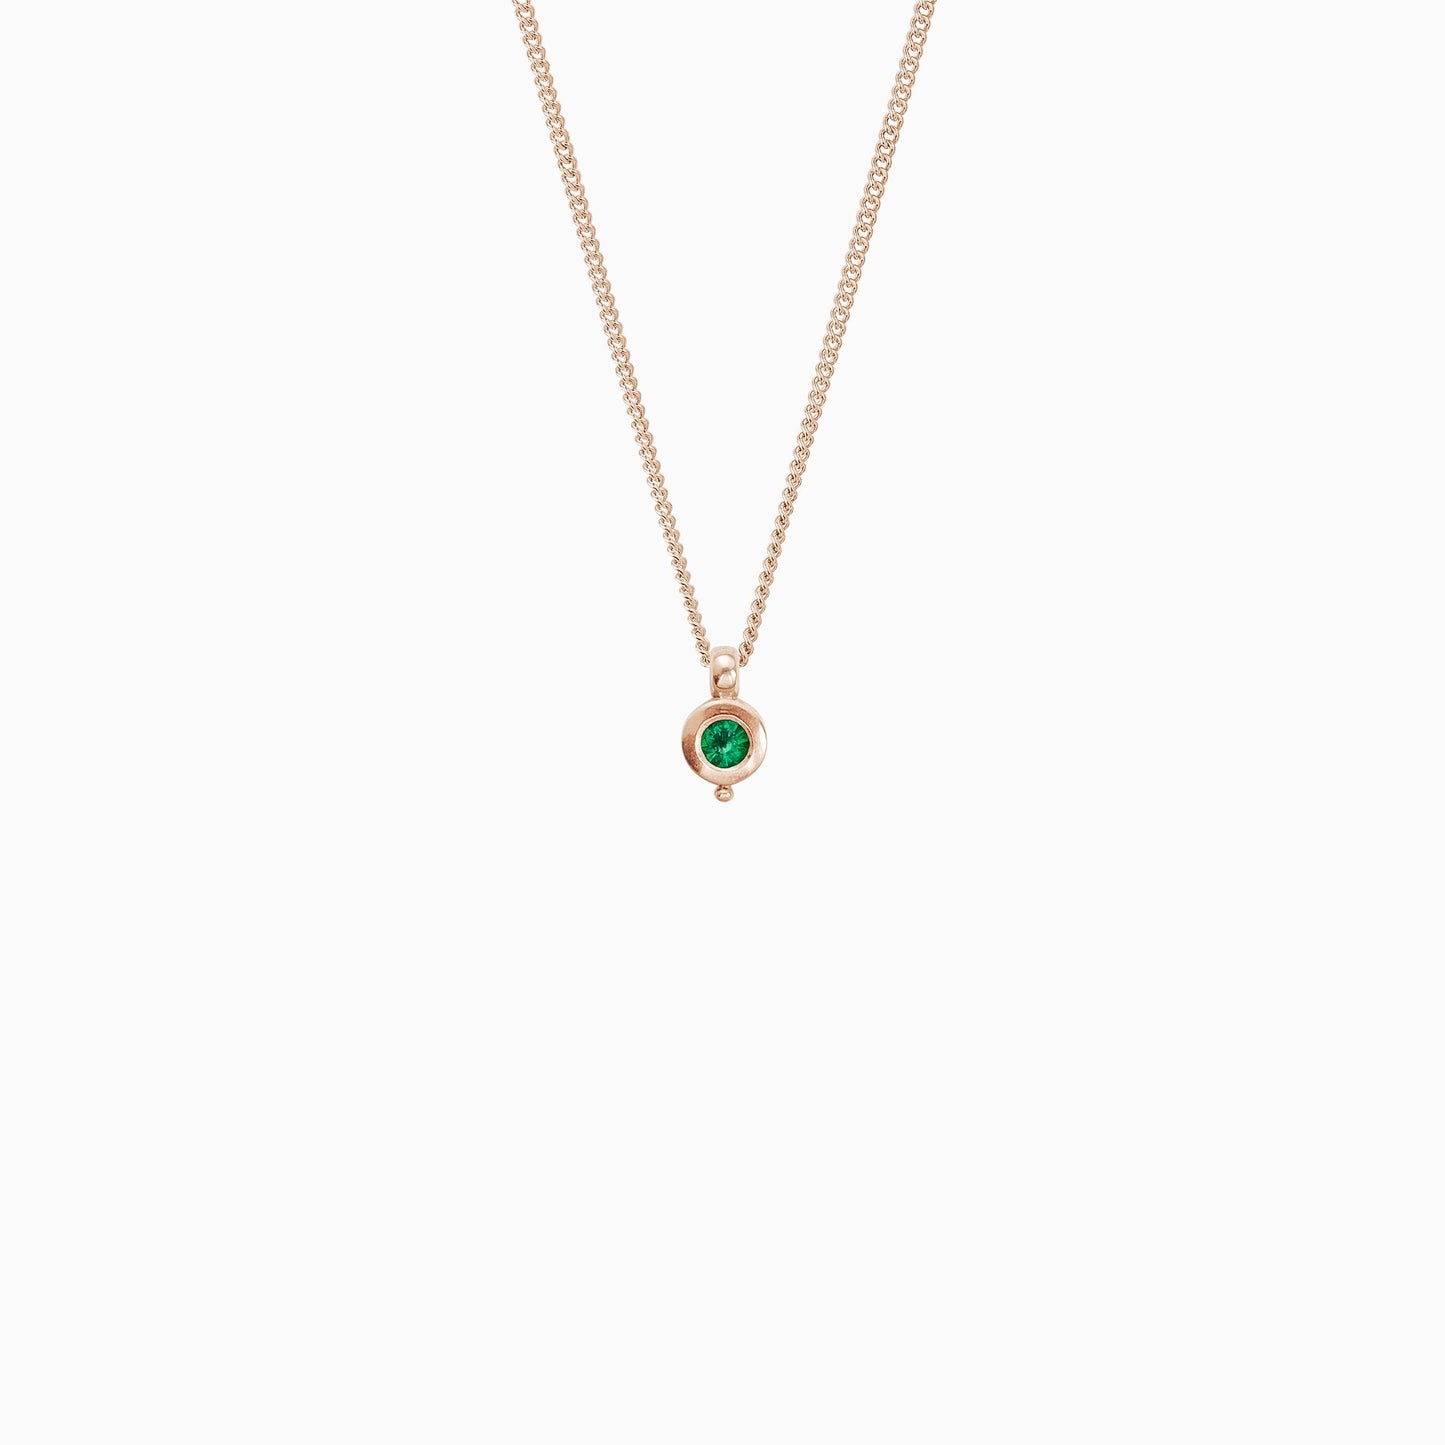 18ct Fairtrade rose gold round pendant 12mm  x 7mm with small round bead attached below on a 45cm fine curb chain. Set with a 4mm round emerald.